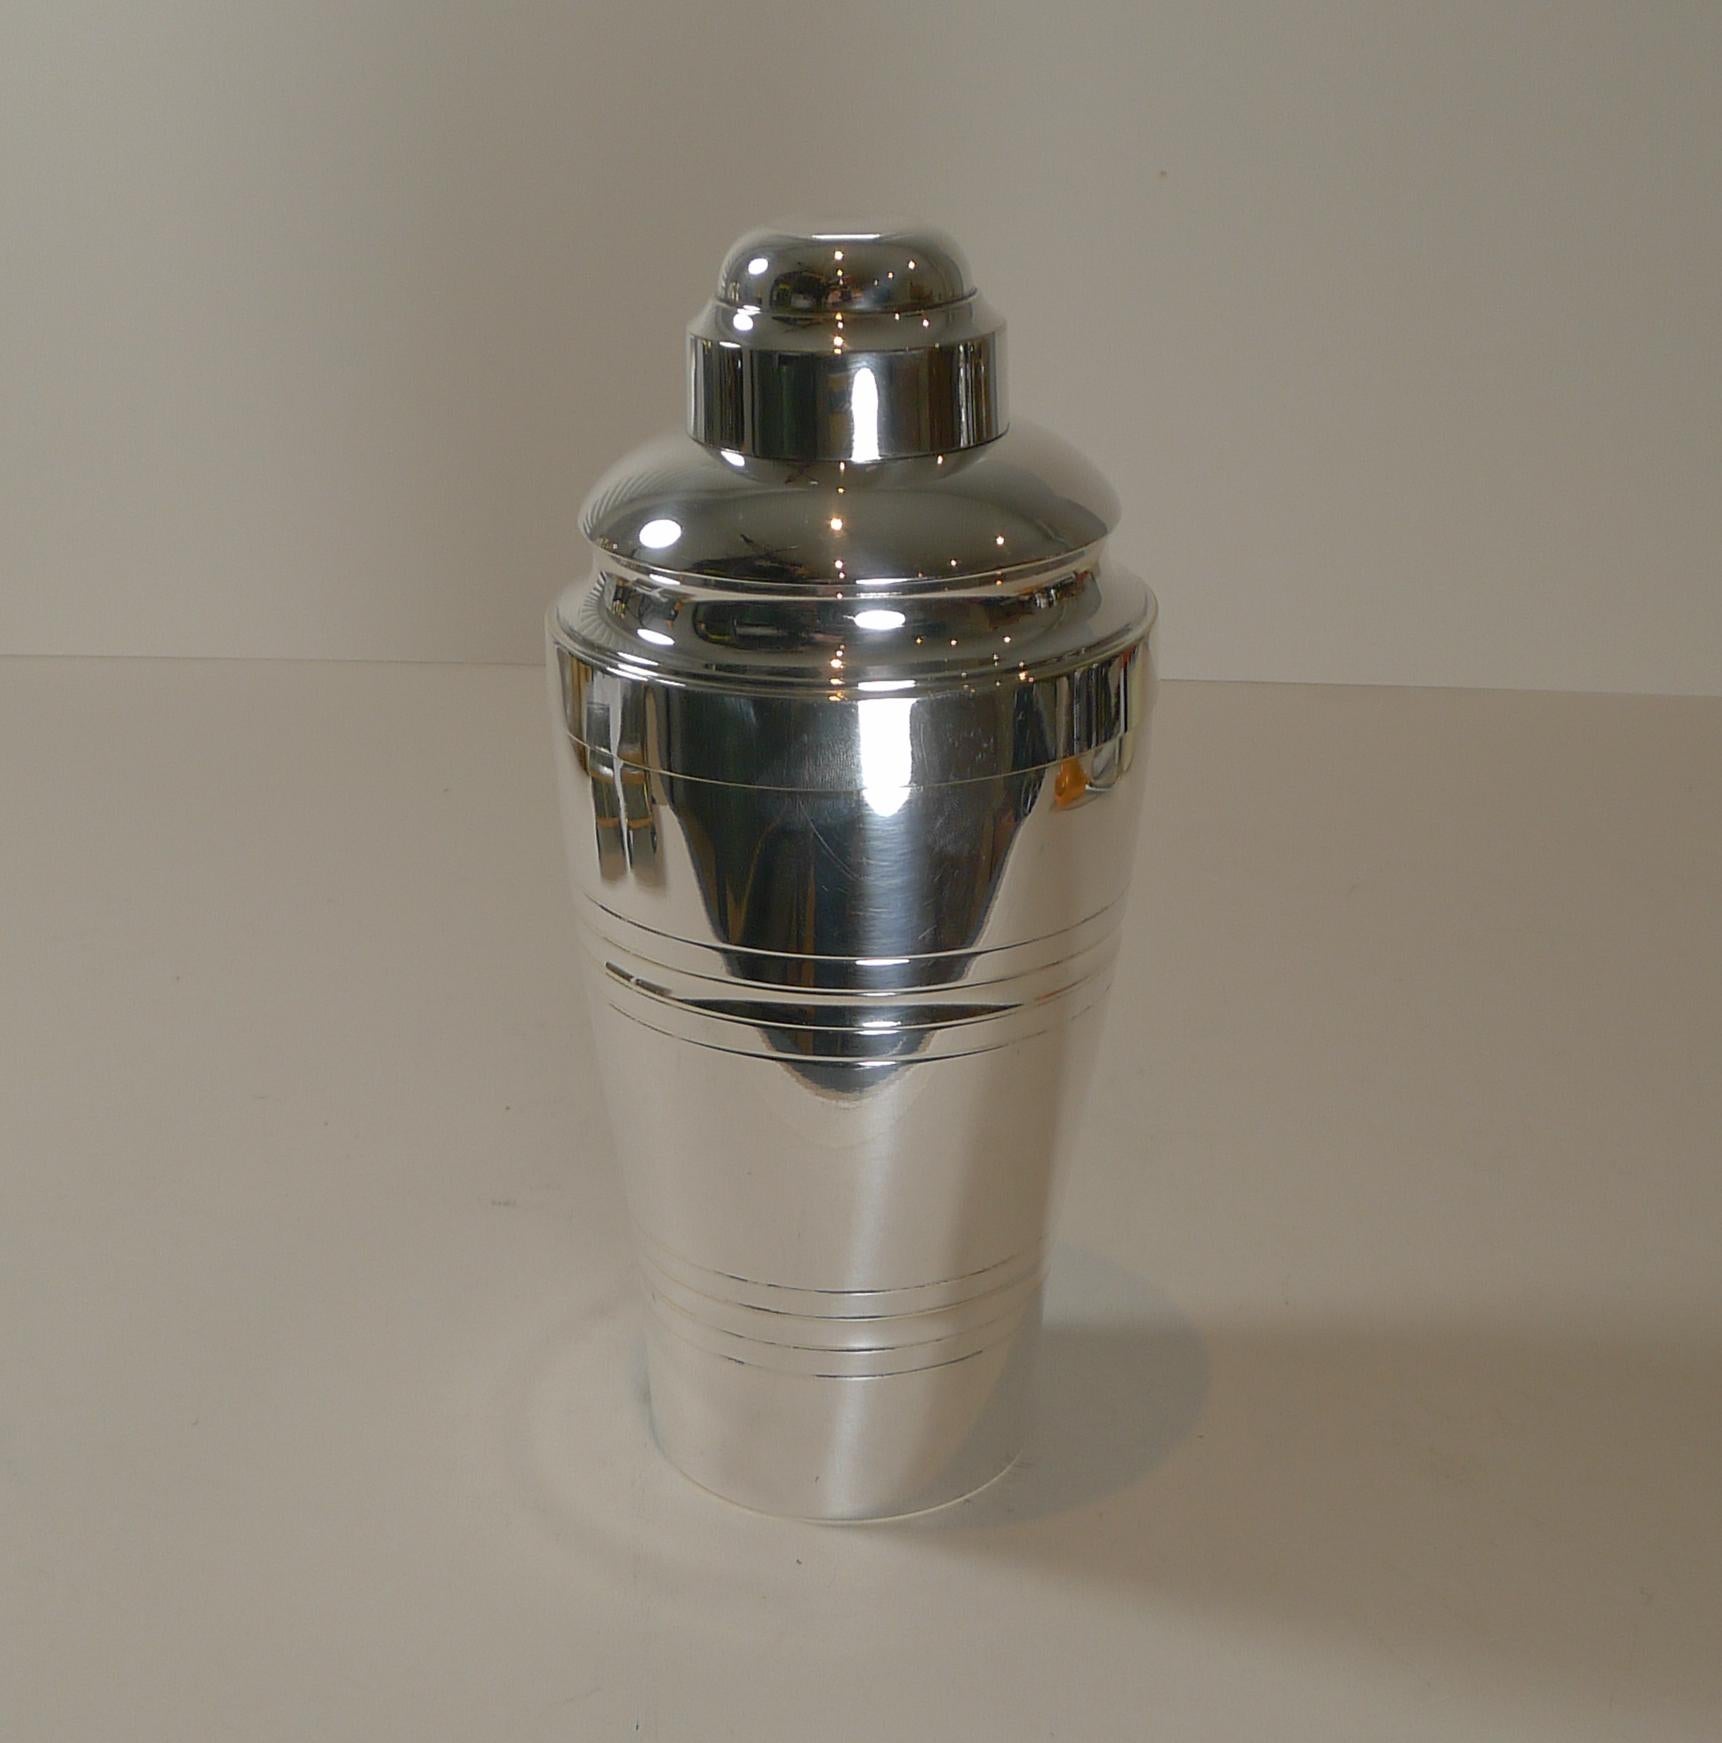 A fabulous vintage French cocktail shaker made from silver plate and just back from our silversmith's workshop where it has been professionally cleaned and polished to gleam.

What makes this particularly sought after is the integral lemon